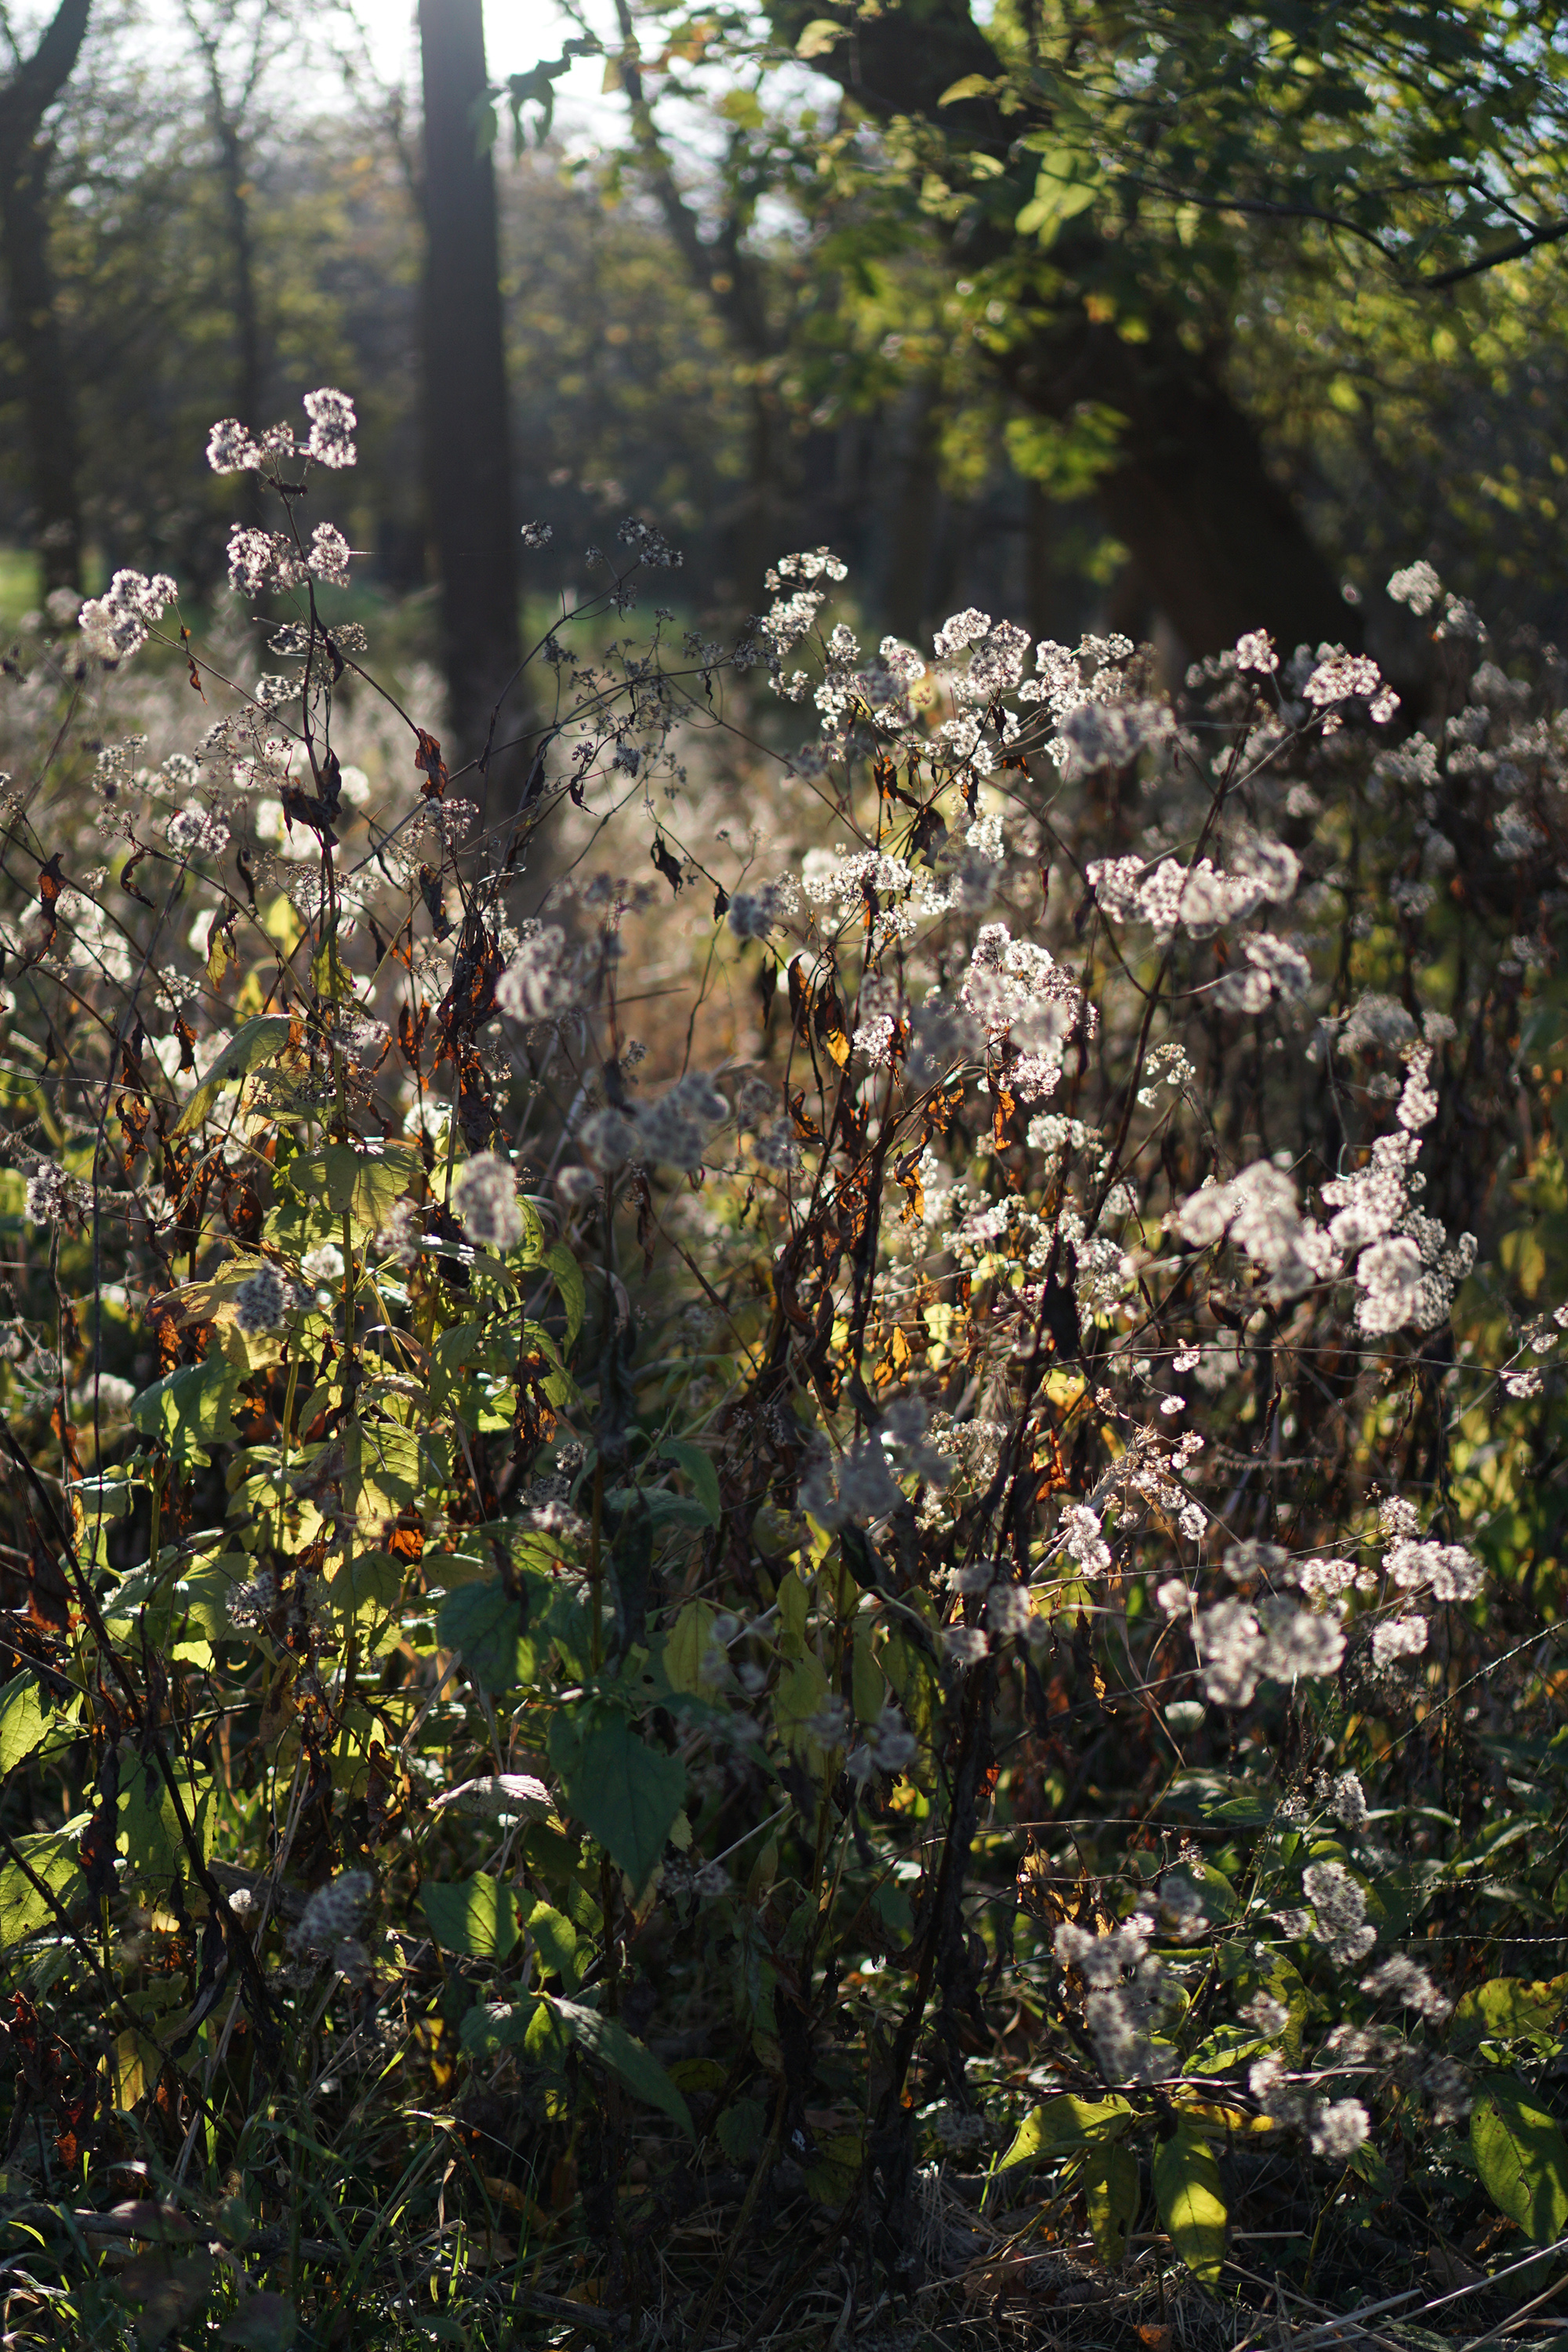 Wildflowers going to seed in the autumn light, Miami Woods, Morton Grove Illinois / Darker than Green